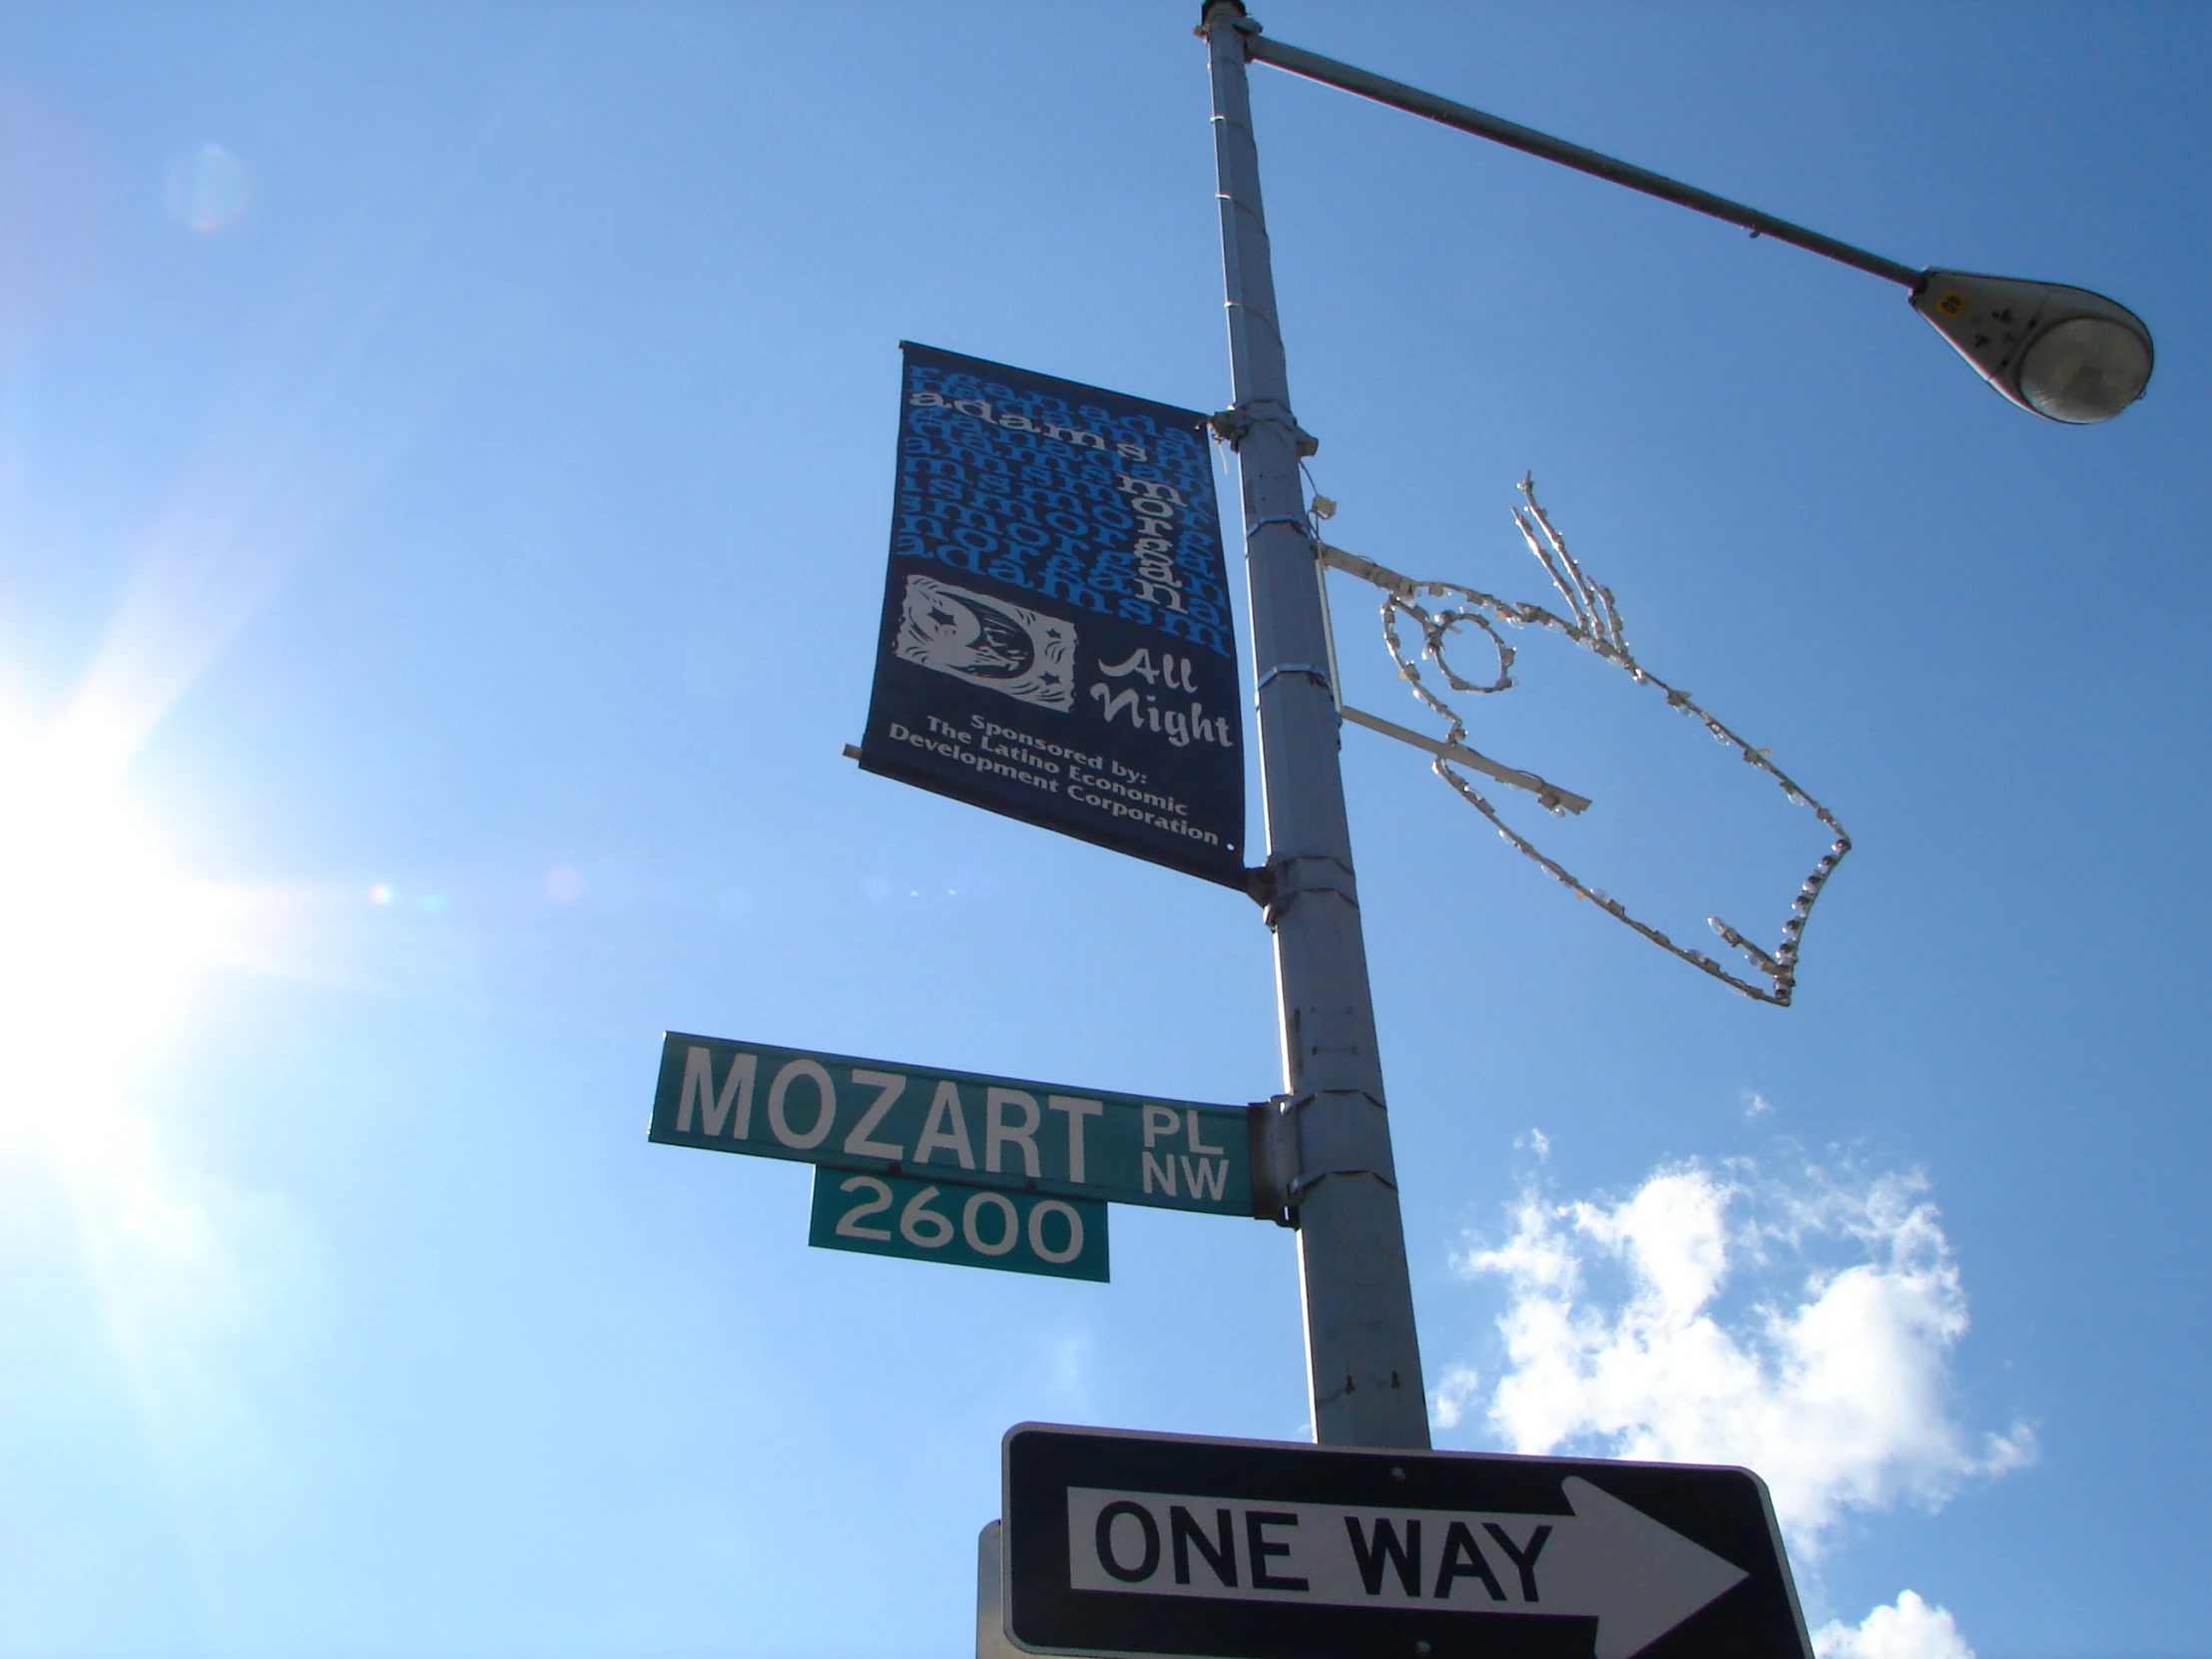 the sun shining on a street light with two street signs